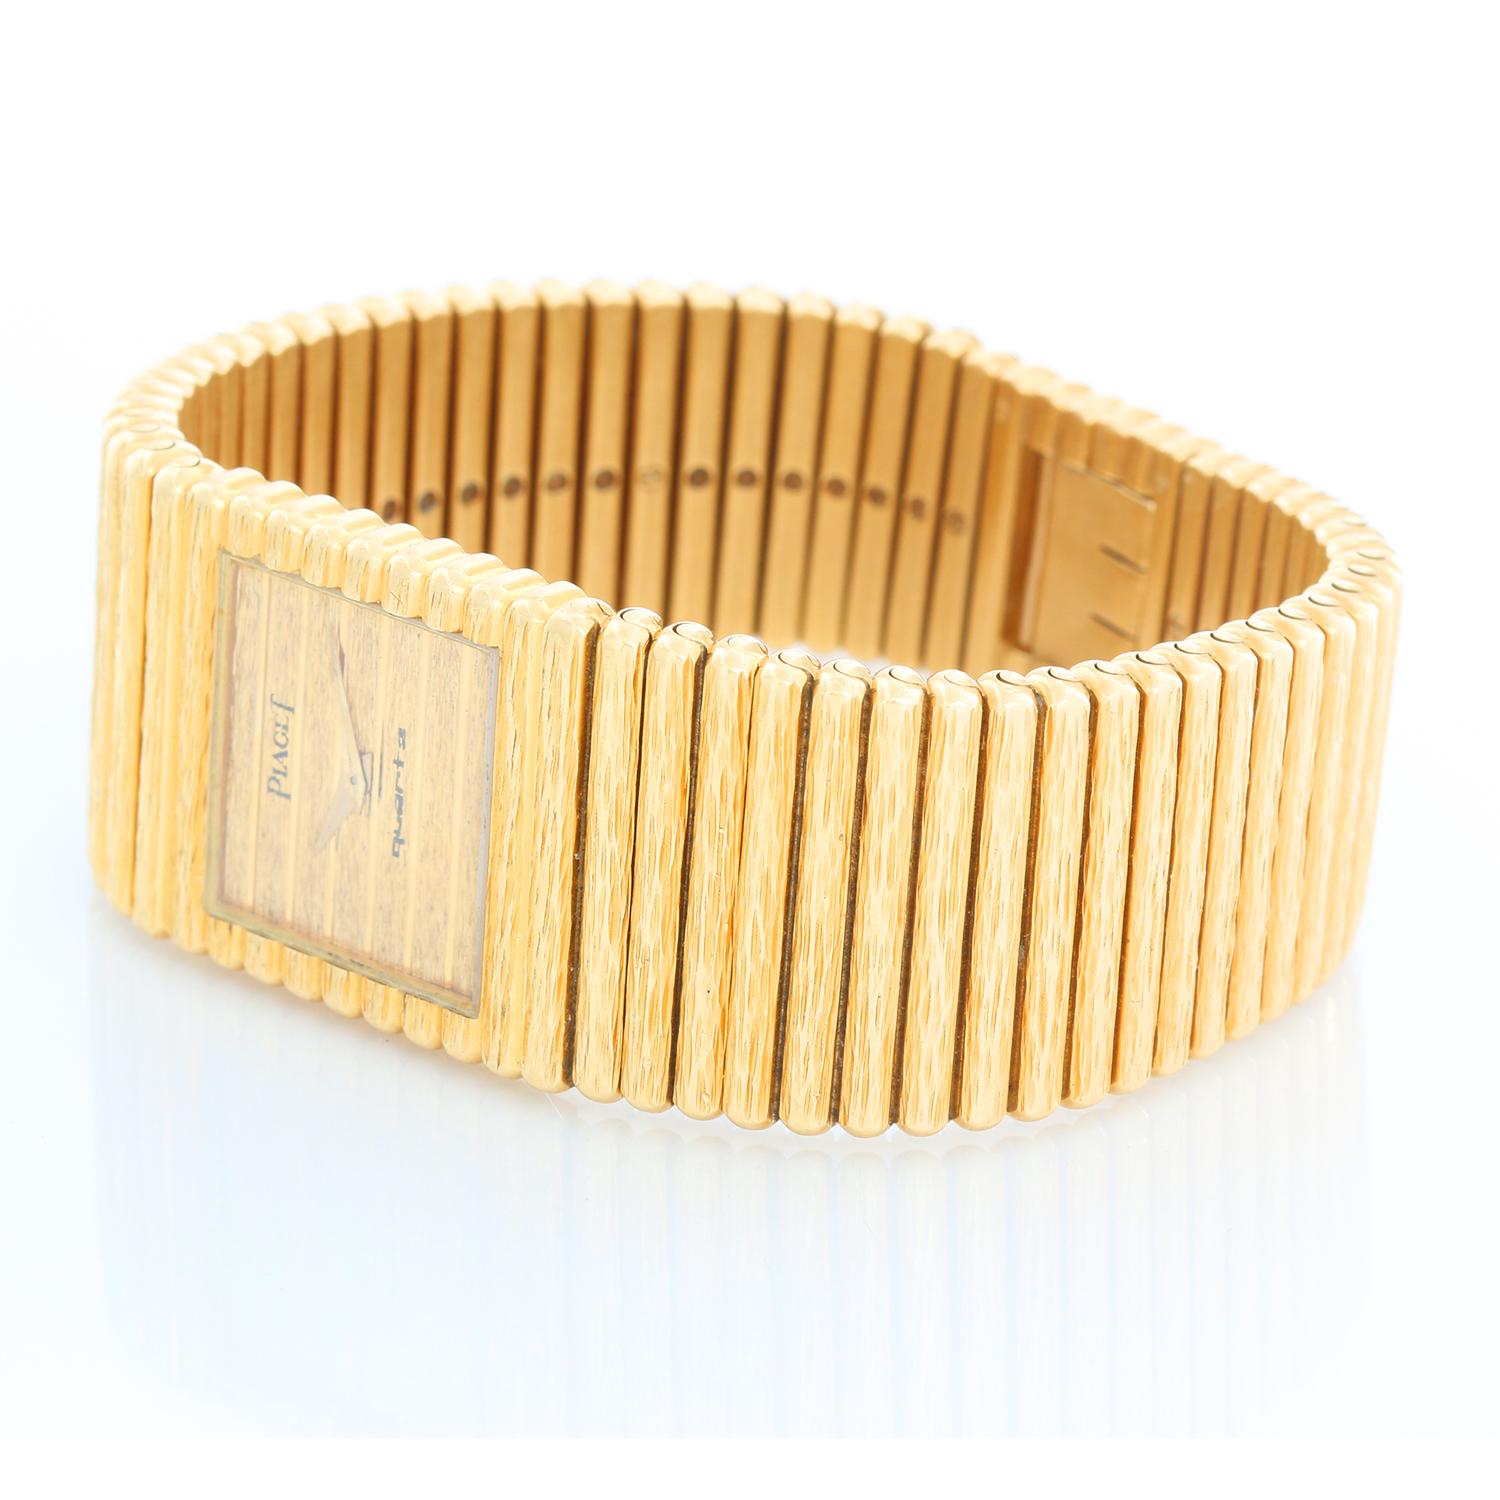 Piaget Emperador 18K Yellow Gold Bark Mens Watch - Quartz. 18K Yellow gold ( 24 mm ). Textured gold Dauphine hands and sapphire crystal. 18K Yellow gold bark integral bracelet; Will fit a 6 3/4 bracelet. Pre-owned with custom box.